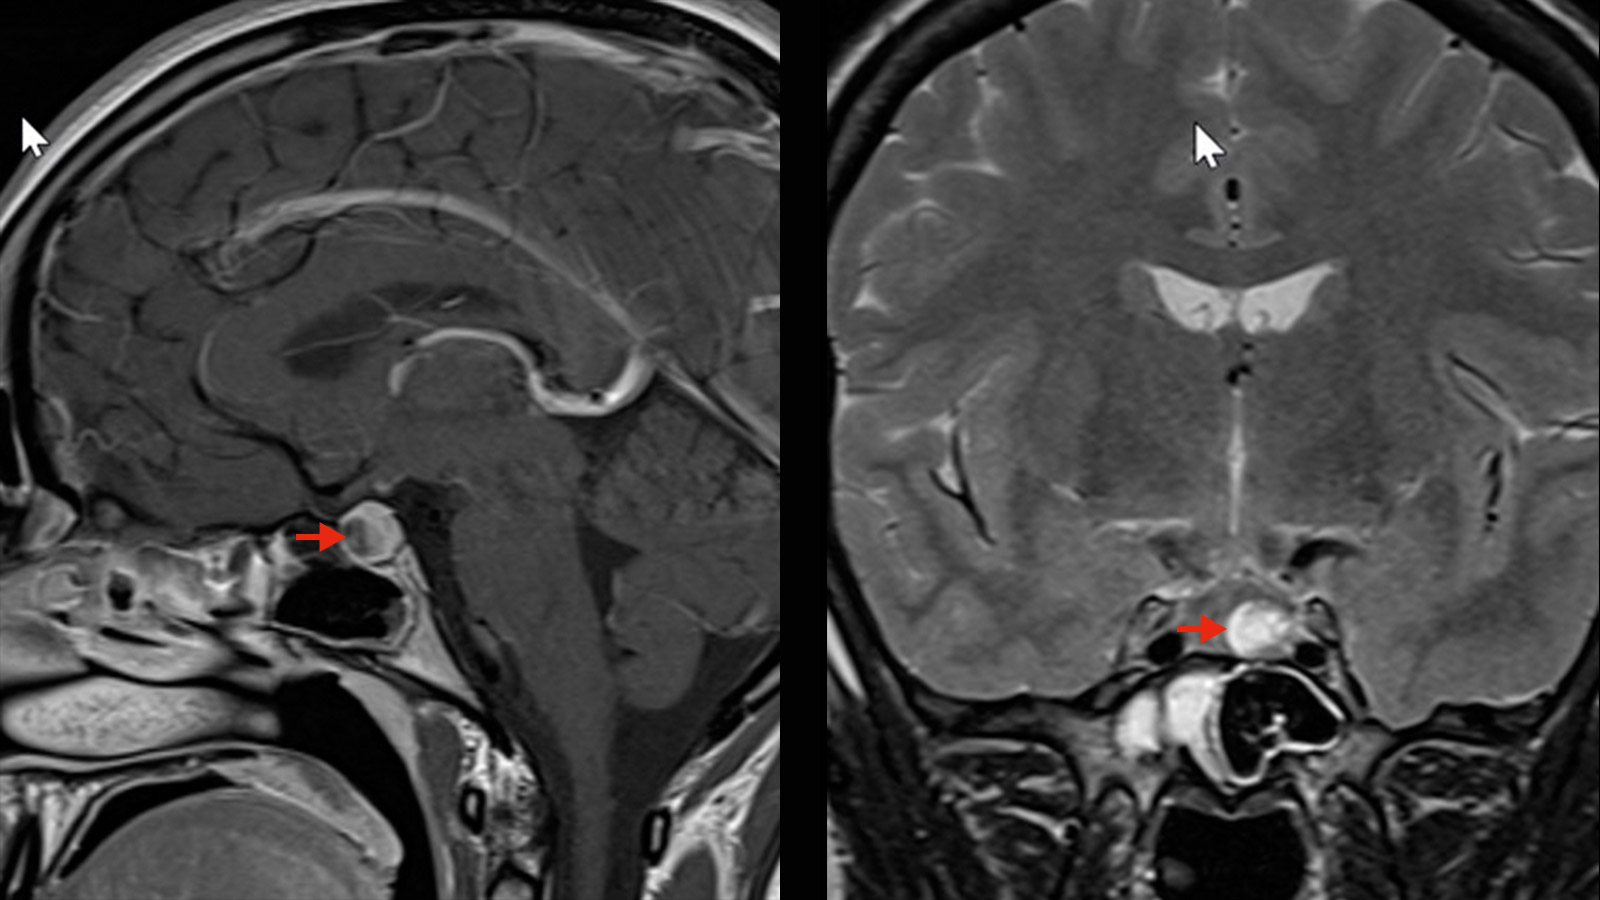 2 MRI images of a microadenoma on the pituitary gland